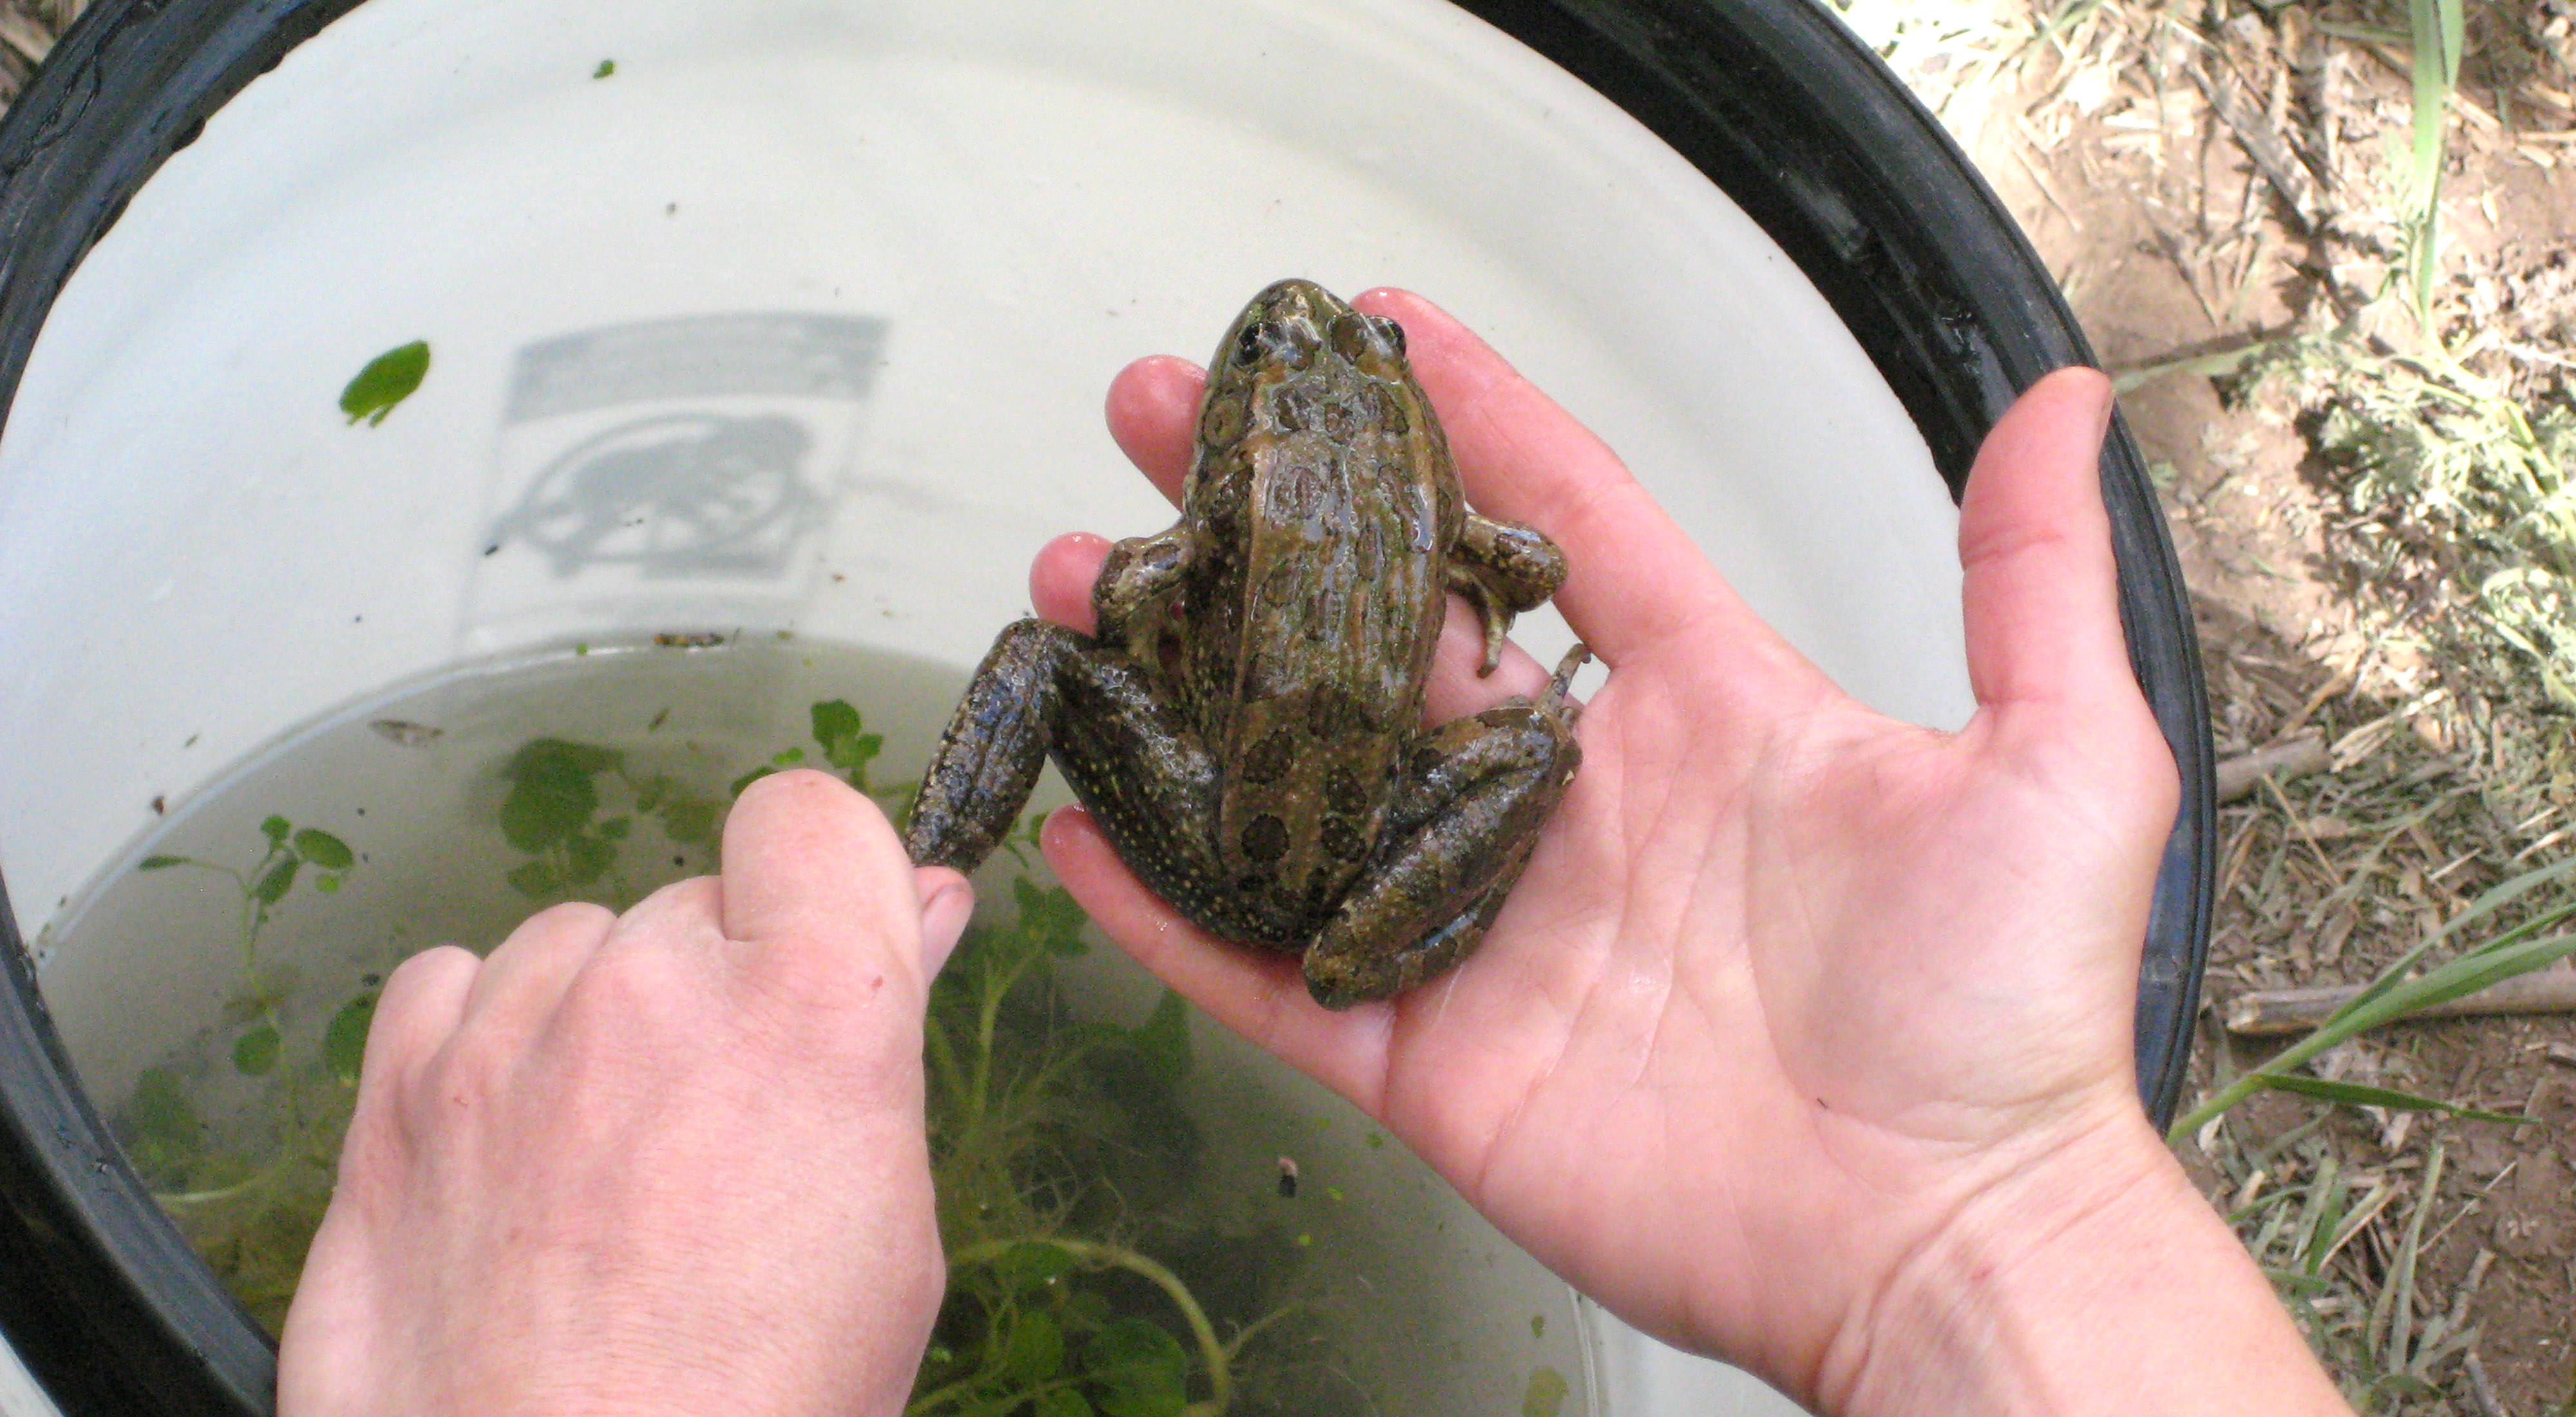 Northern Leopard Frog in hand